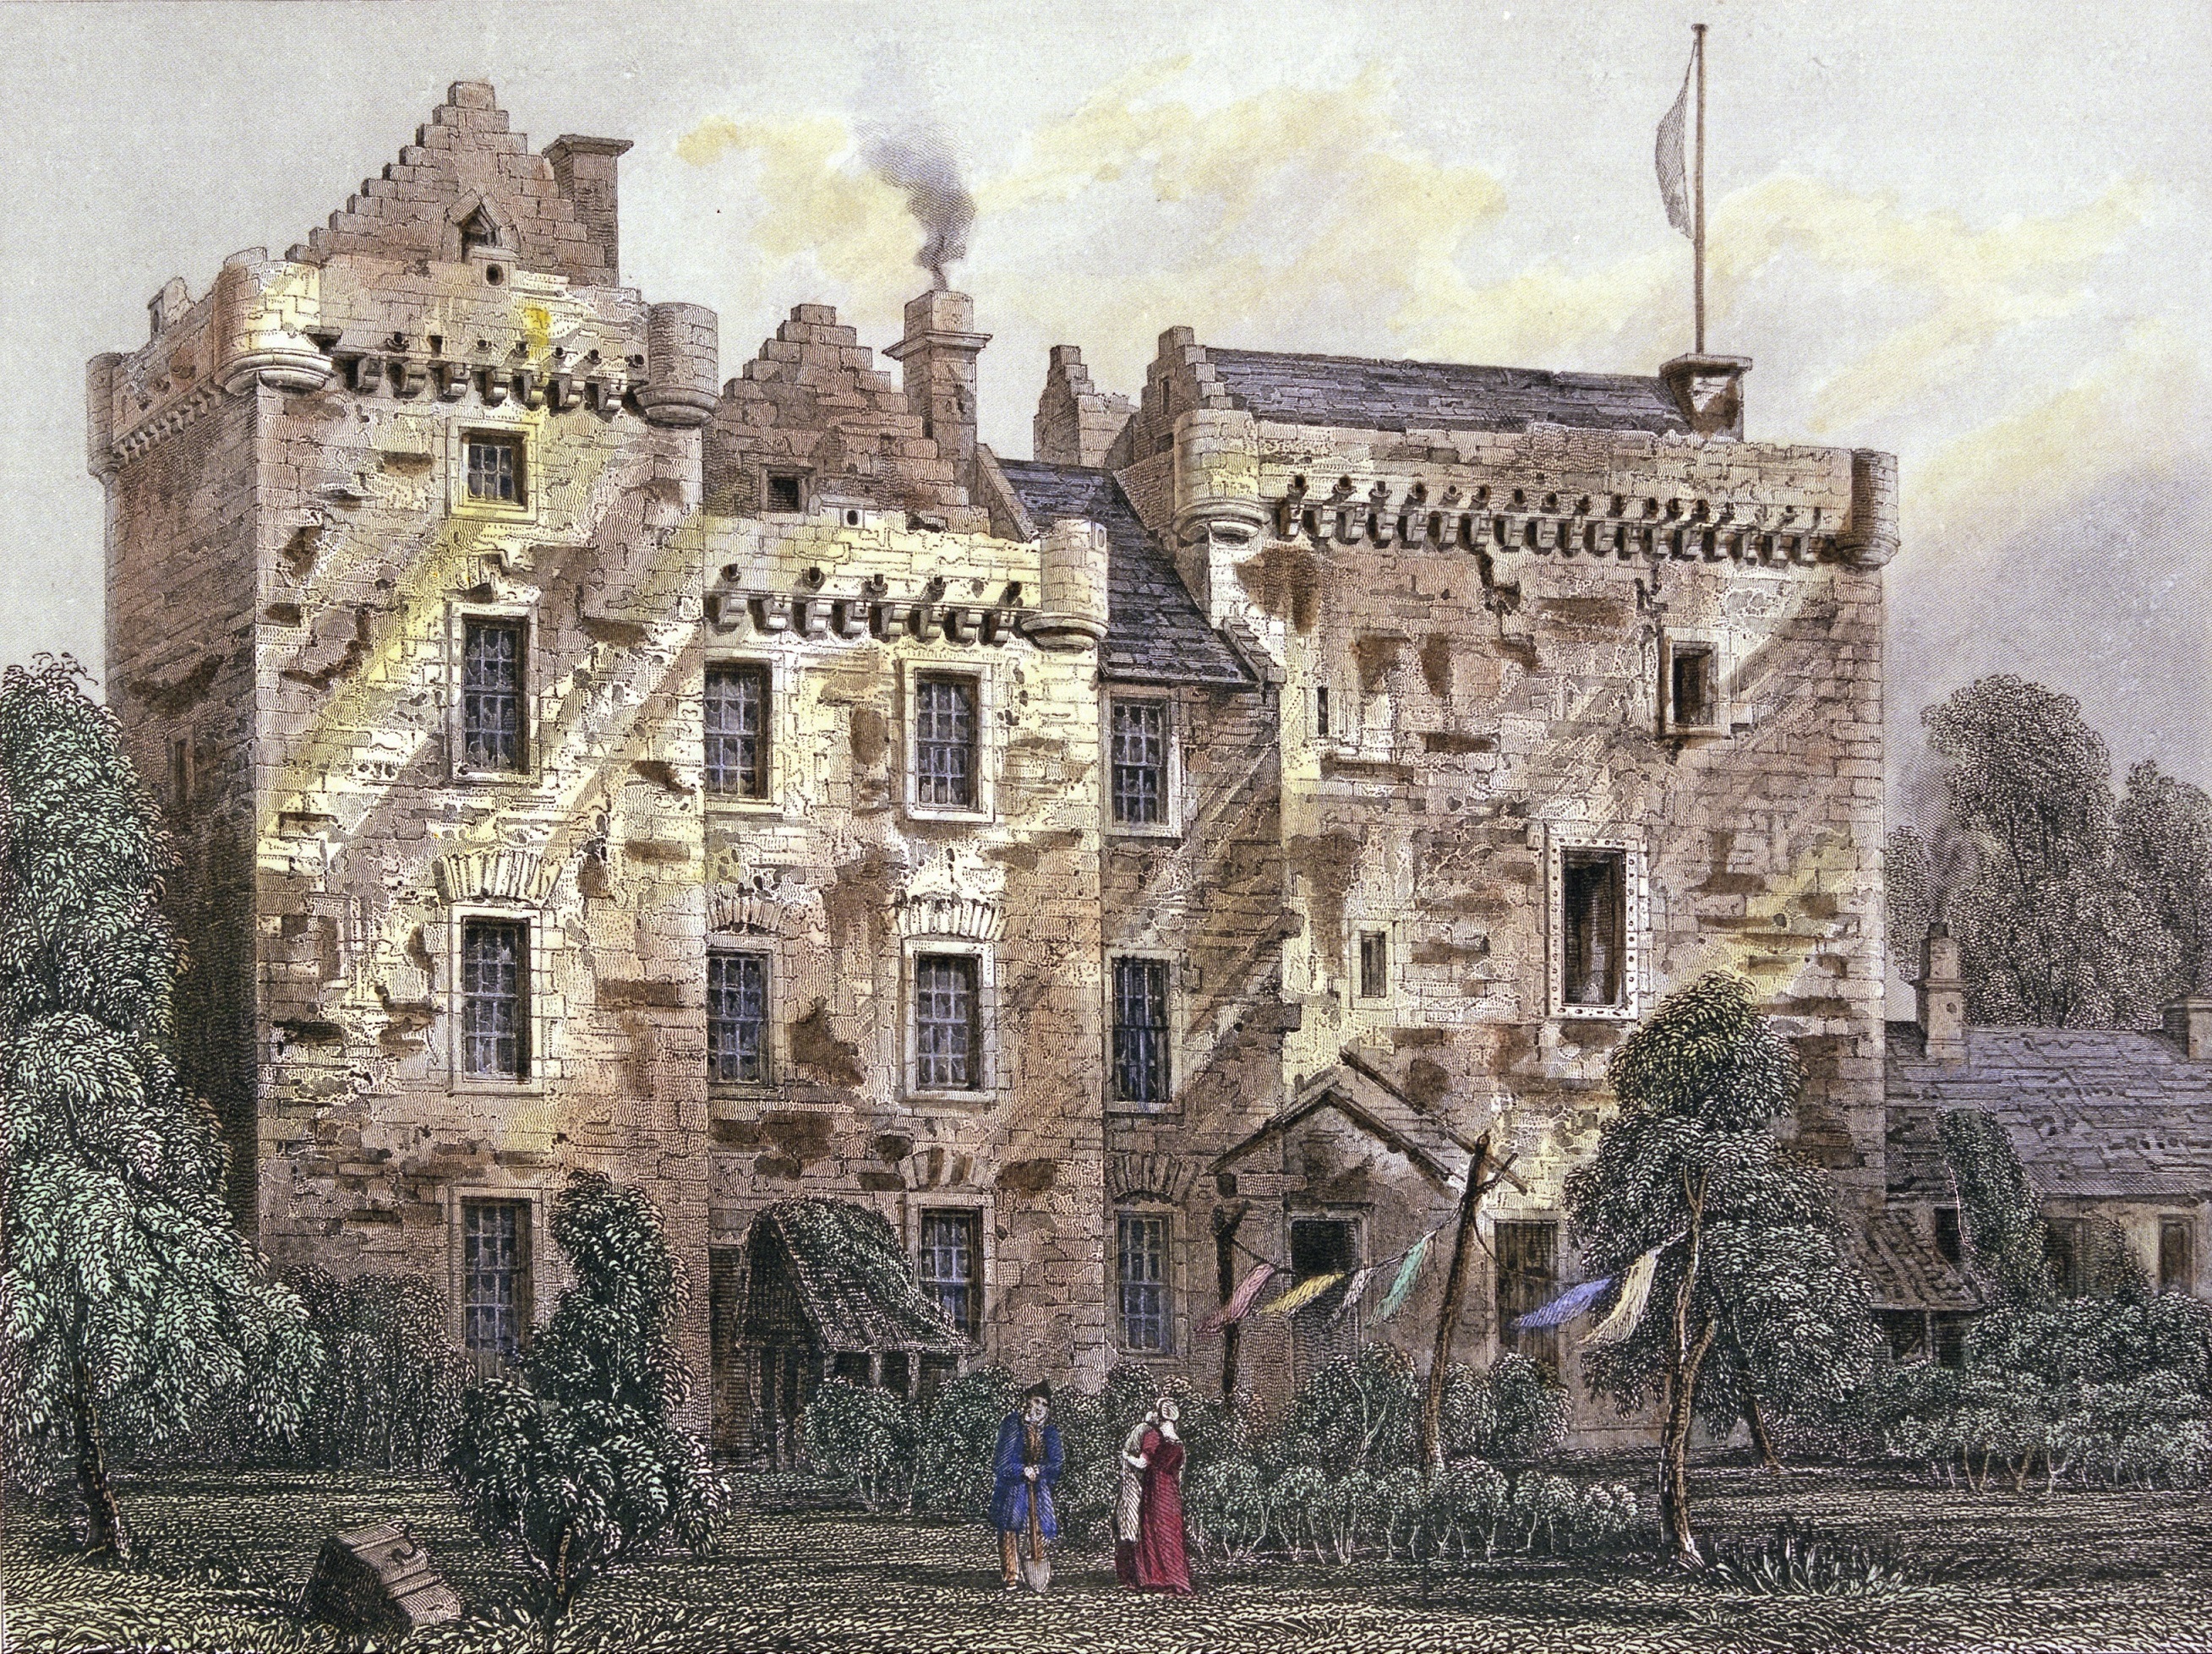 A painting of a castle as it may have appeared in medieval times with smoke billowing from the chimneys two figures walking through the gardens